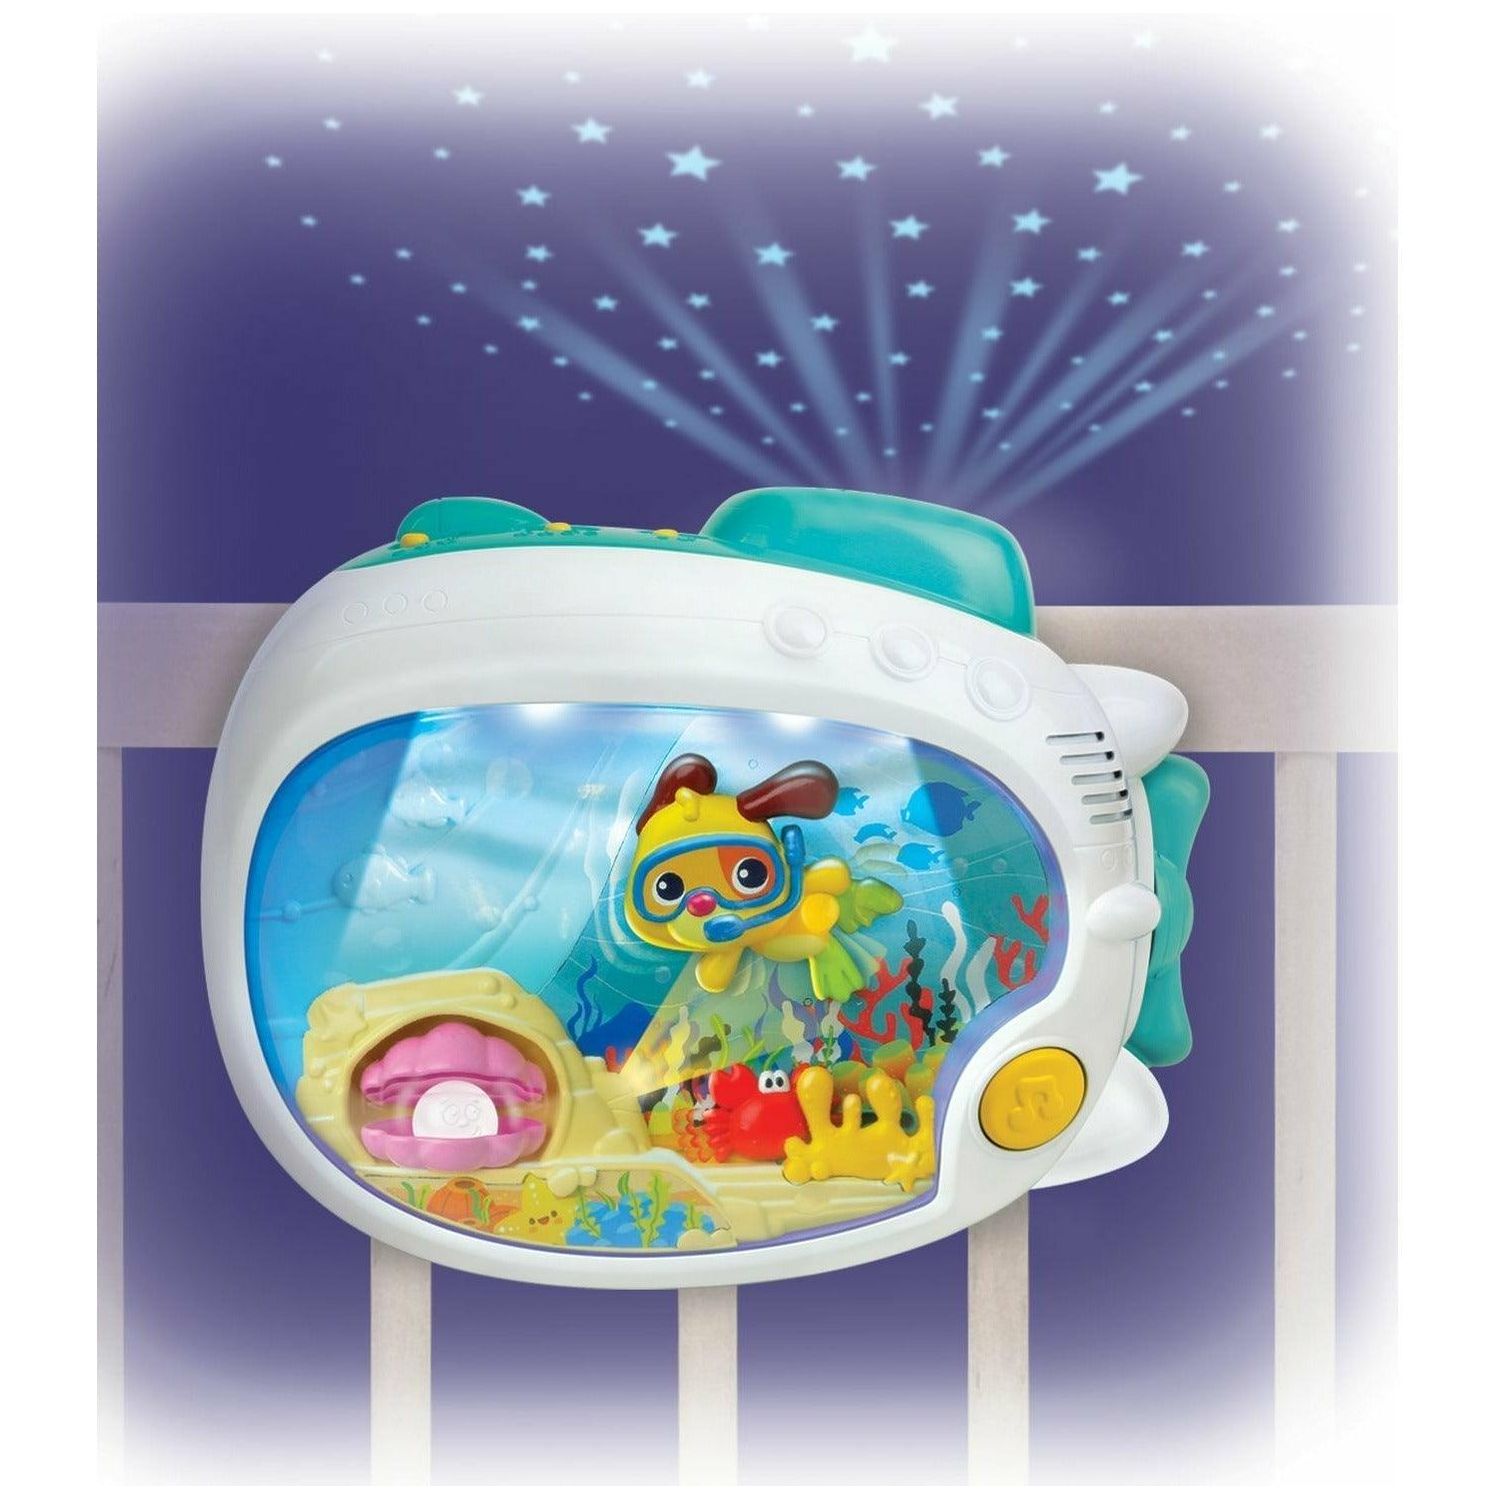 Winfun 3-In-1 Soothing Seas Nightlight Musical sleep projector - BumbleToys - 0-24 Months, Babies, Baby Saftey & Health, Boys, Cecil, Girls, Nursery Toys, Rattles, Unisex